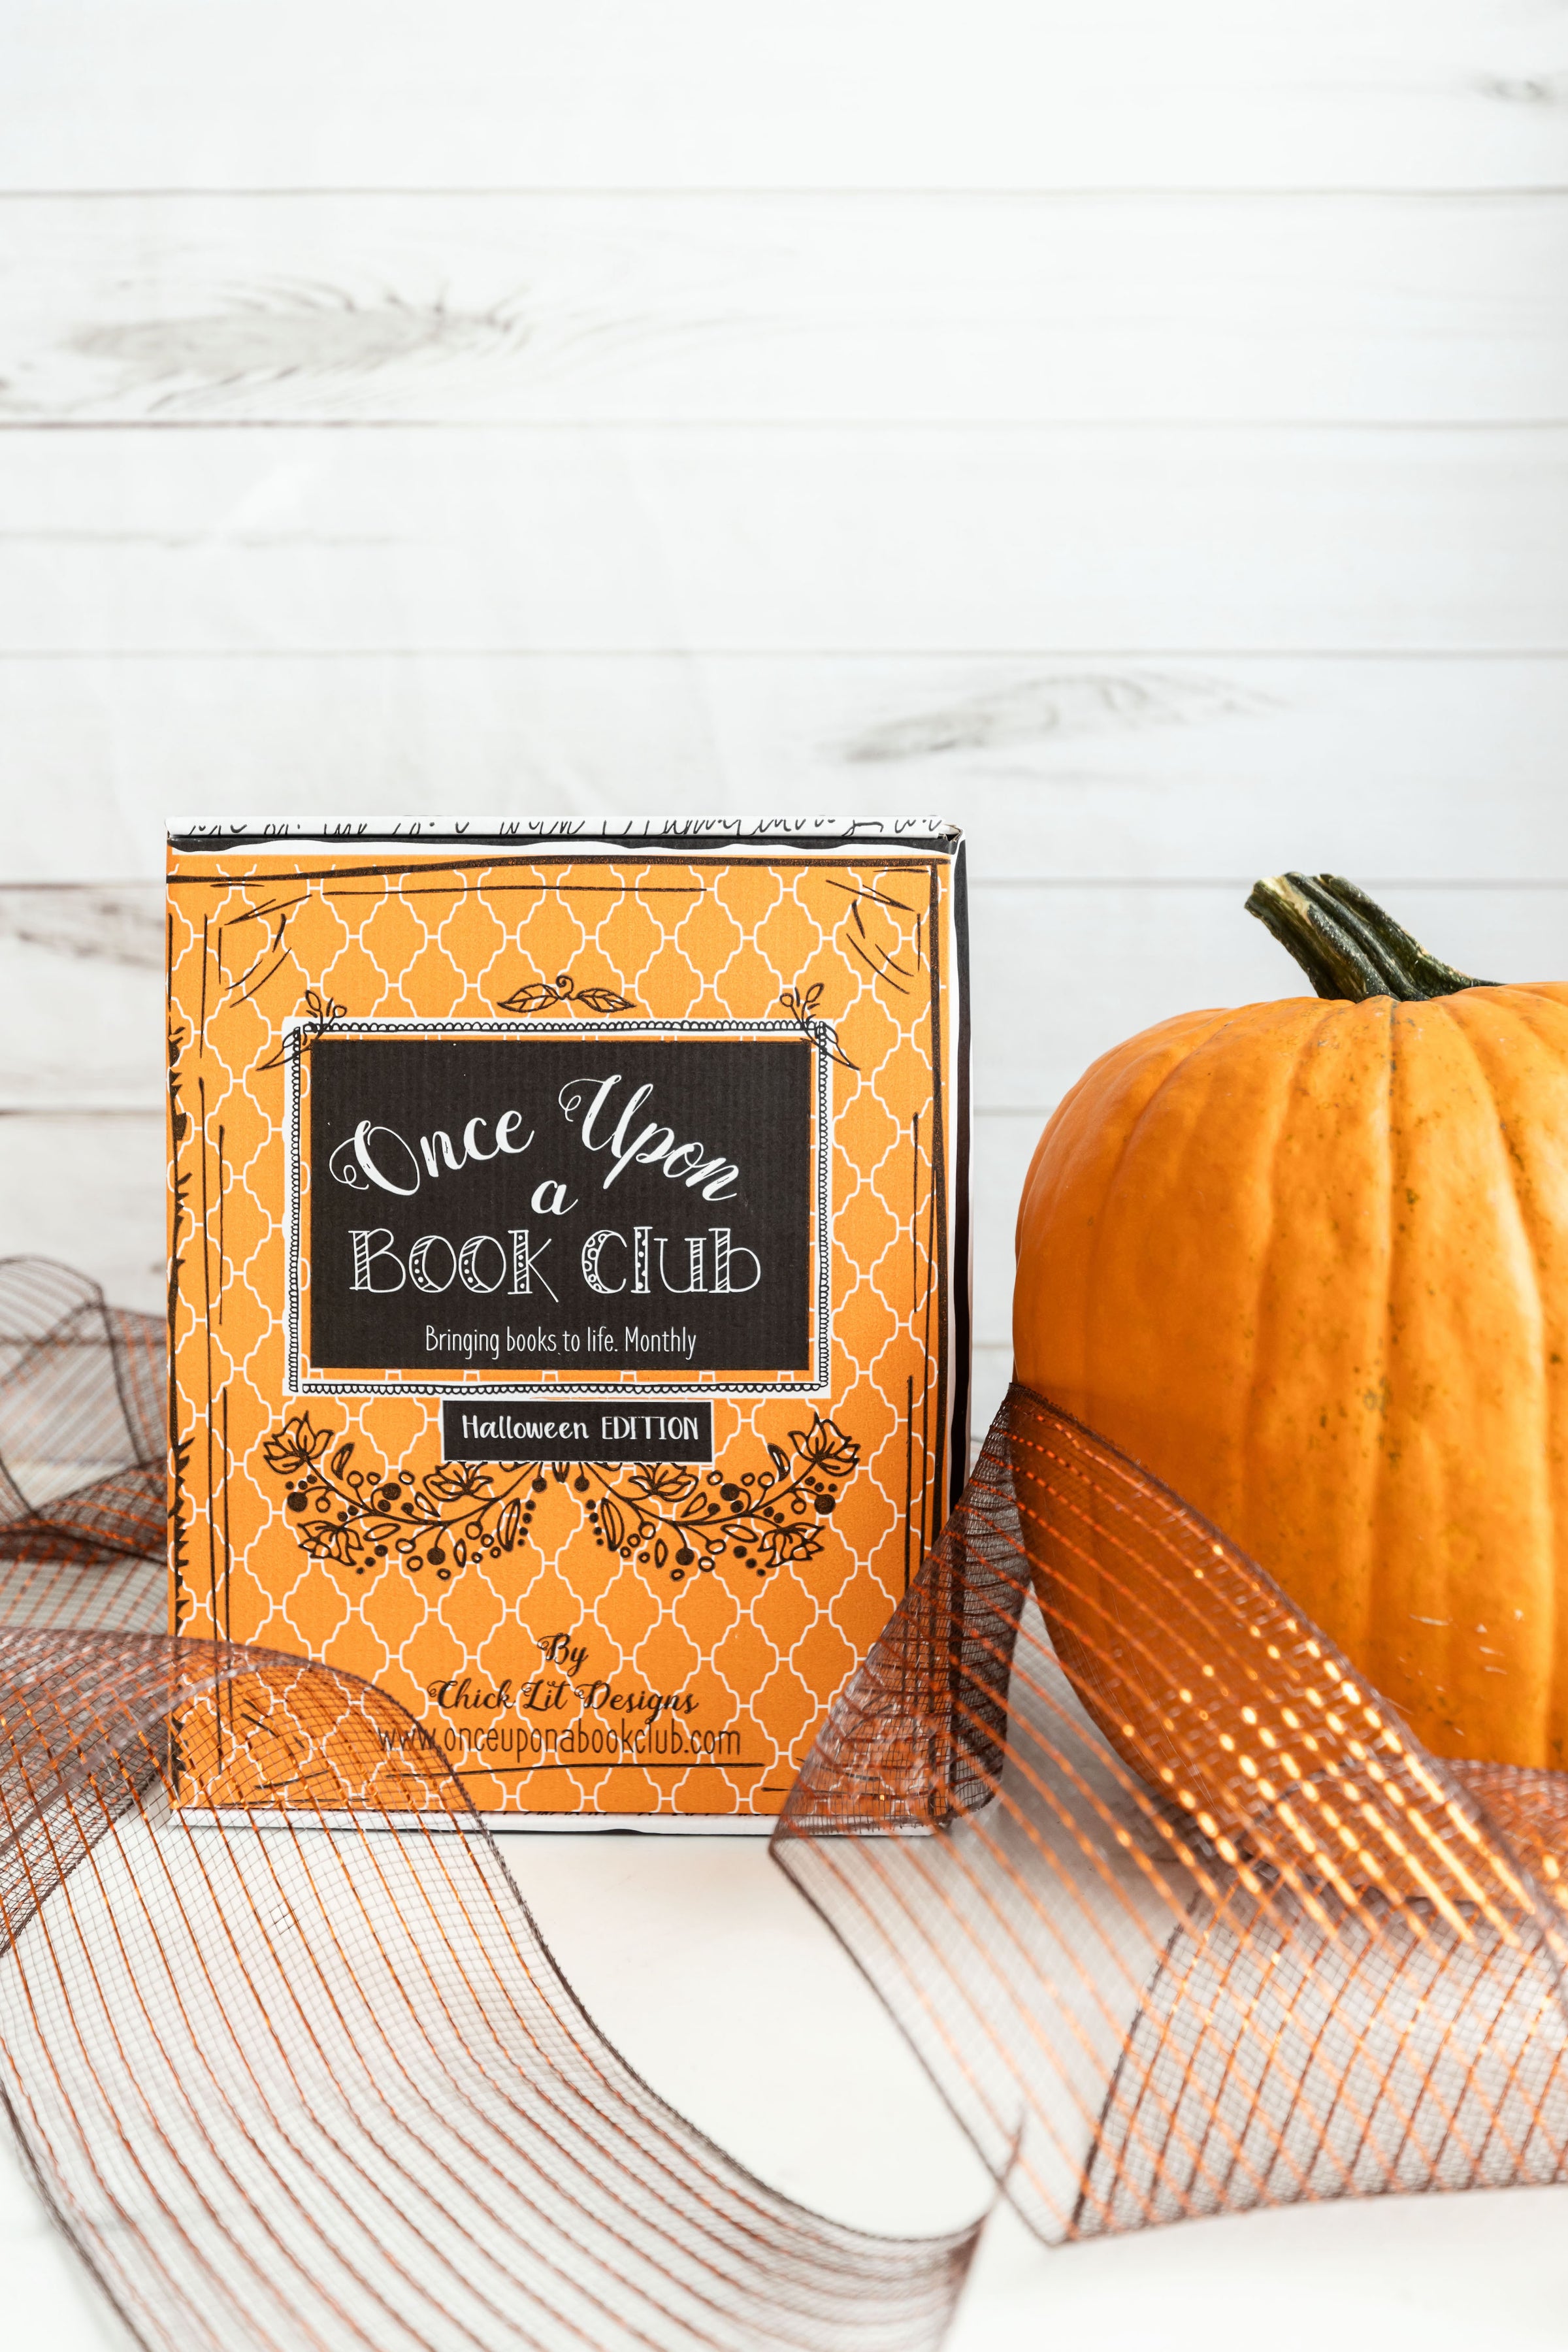 An orange Once Upon a Book Club Halloween Edition box sits next to a pumpkin. Bronze ribbon surrounds the two.